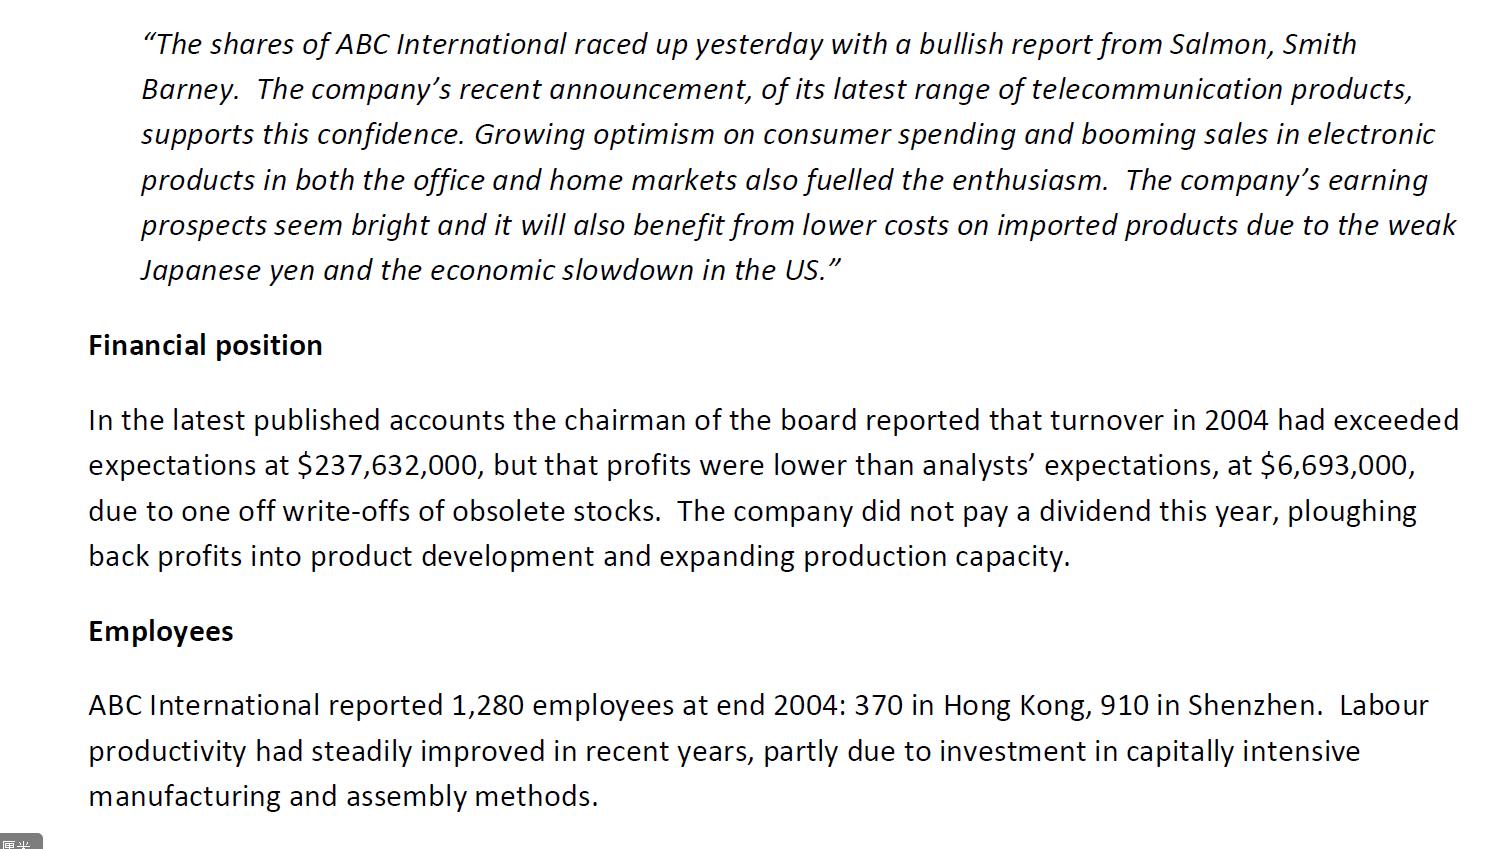 “The shares of ABC International raced up yesterday with a bullish report from Salmon, Smith Barney. The companys recent ann